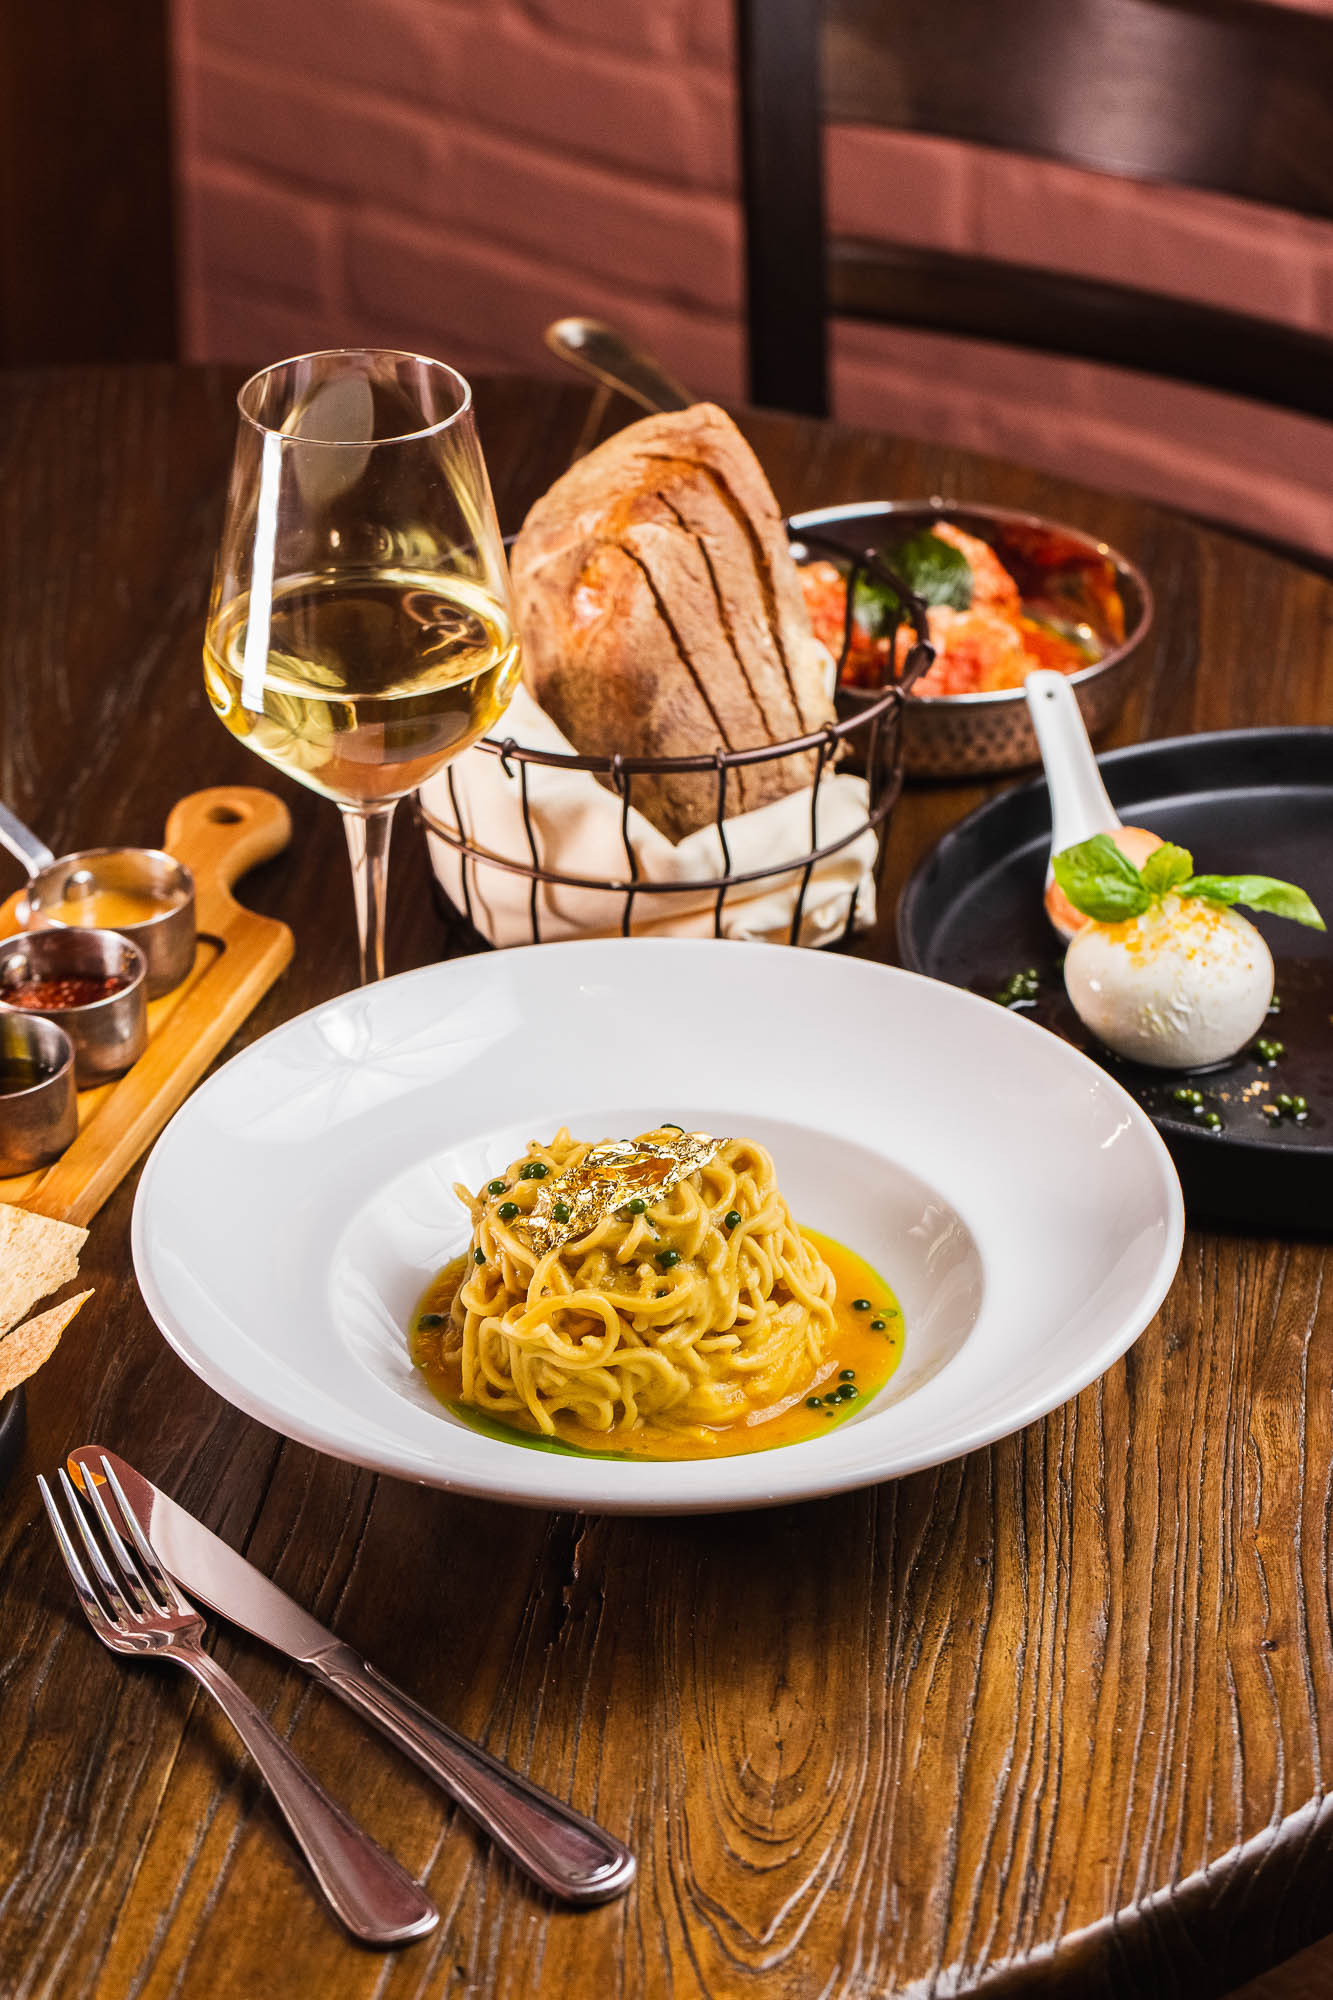 Spaghetti in golden tomato sauce on a table with white wine glass, bread and condiments